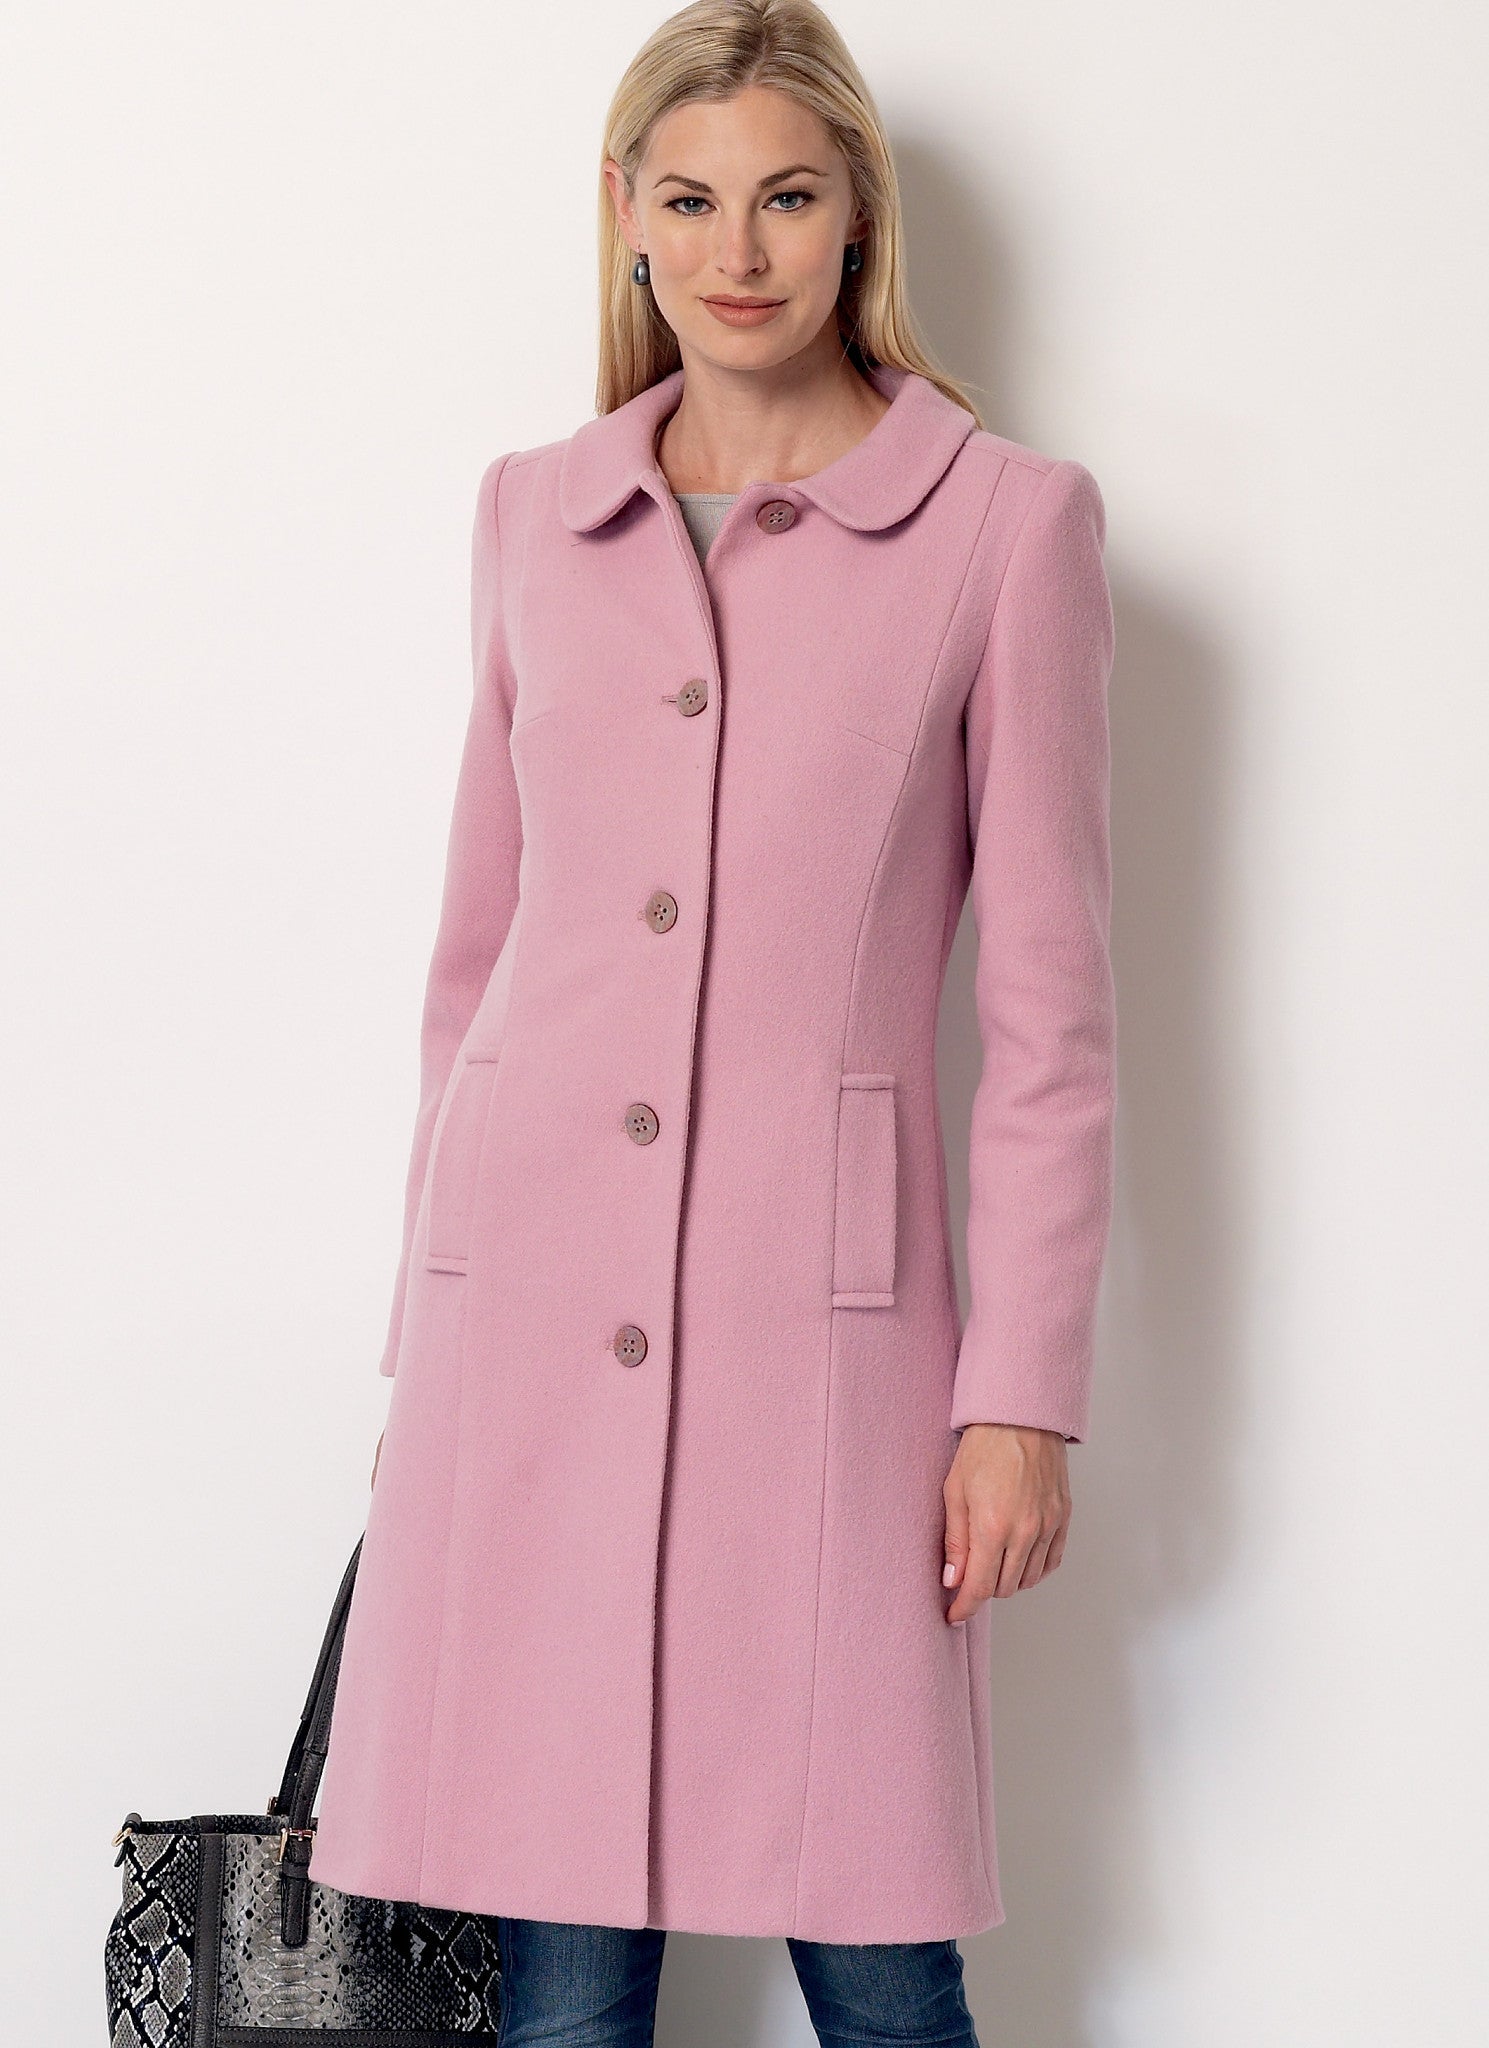 B6385 Misses' Funnel-Neck, Peter Pan or Pointed Collar Coats from Jaycotts Sewing Supplies